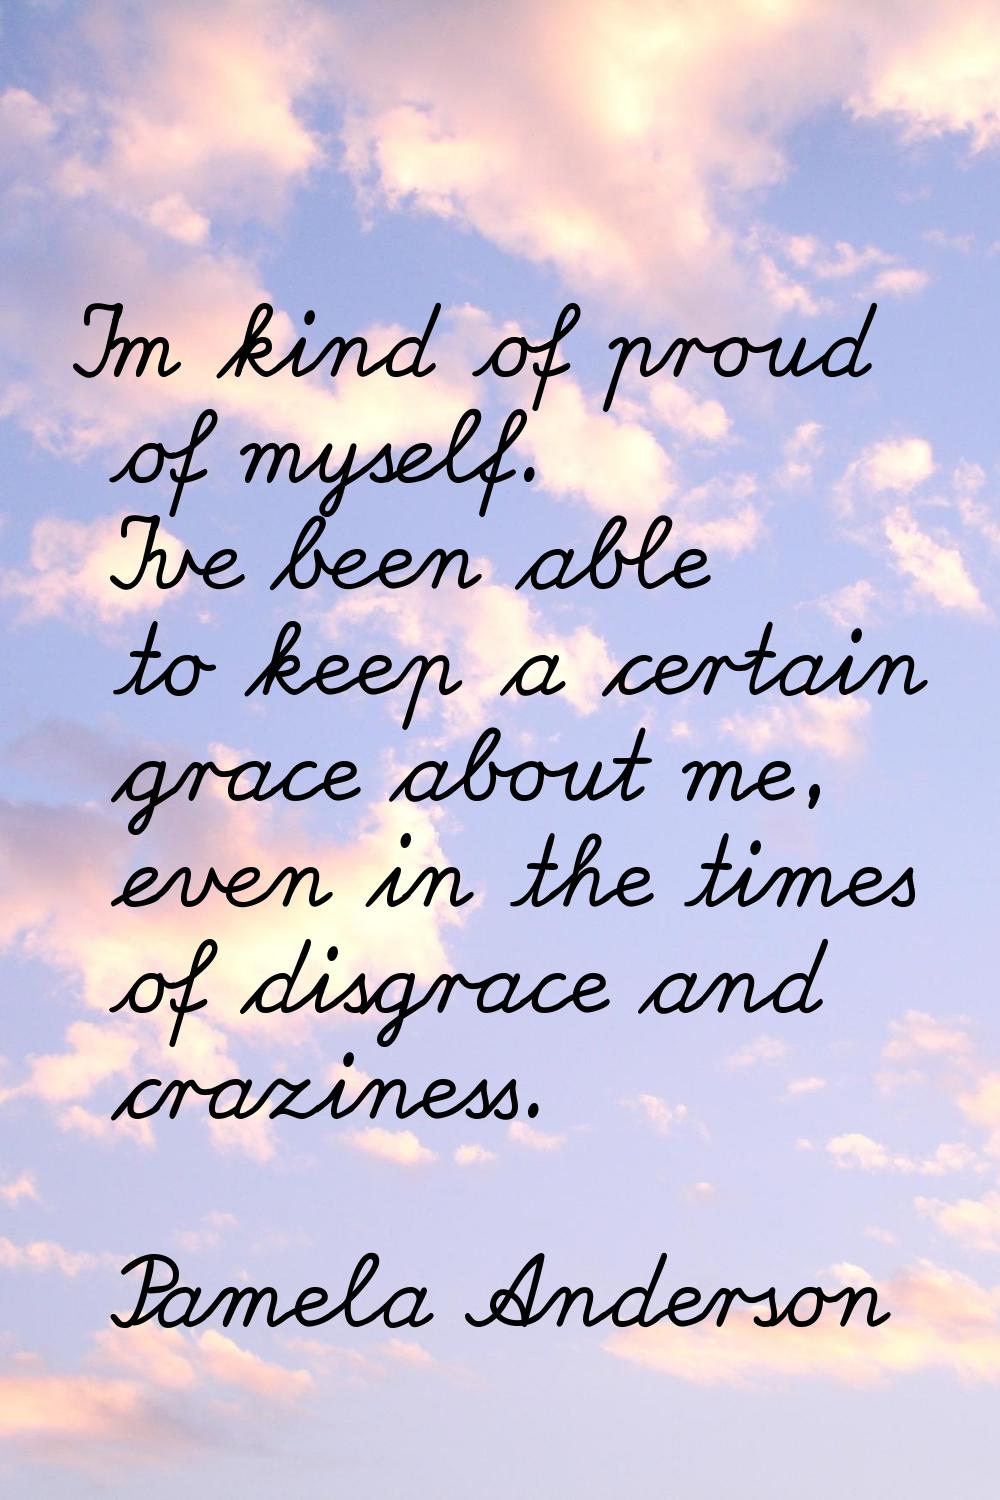 I'm kind of proud of myself. I've been able to keep a certain grace about me, even in the times of 